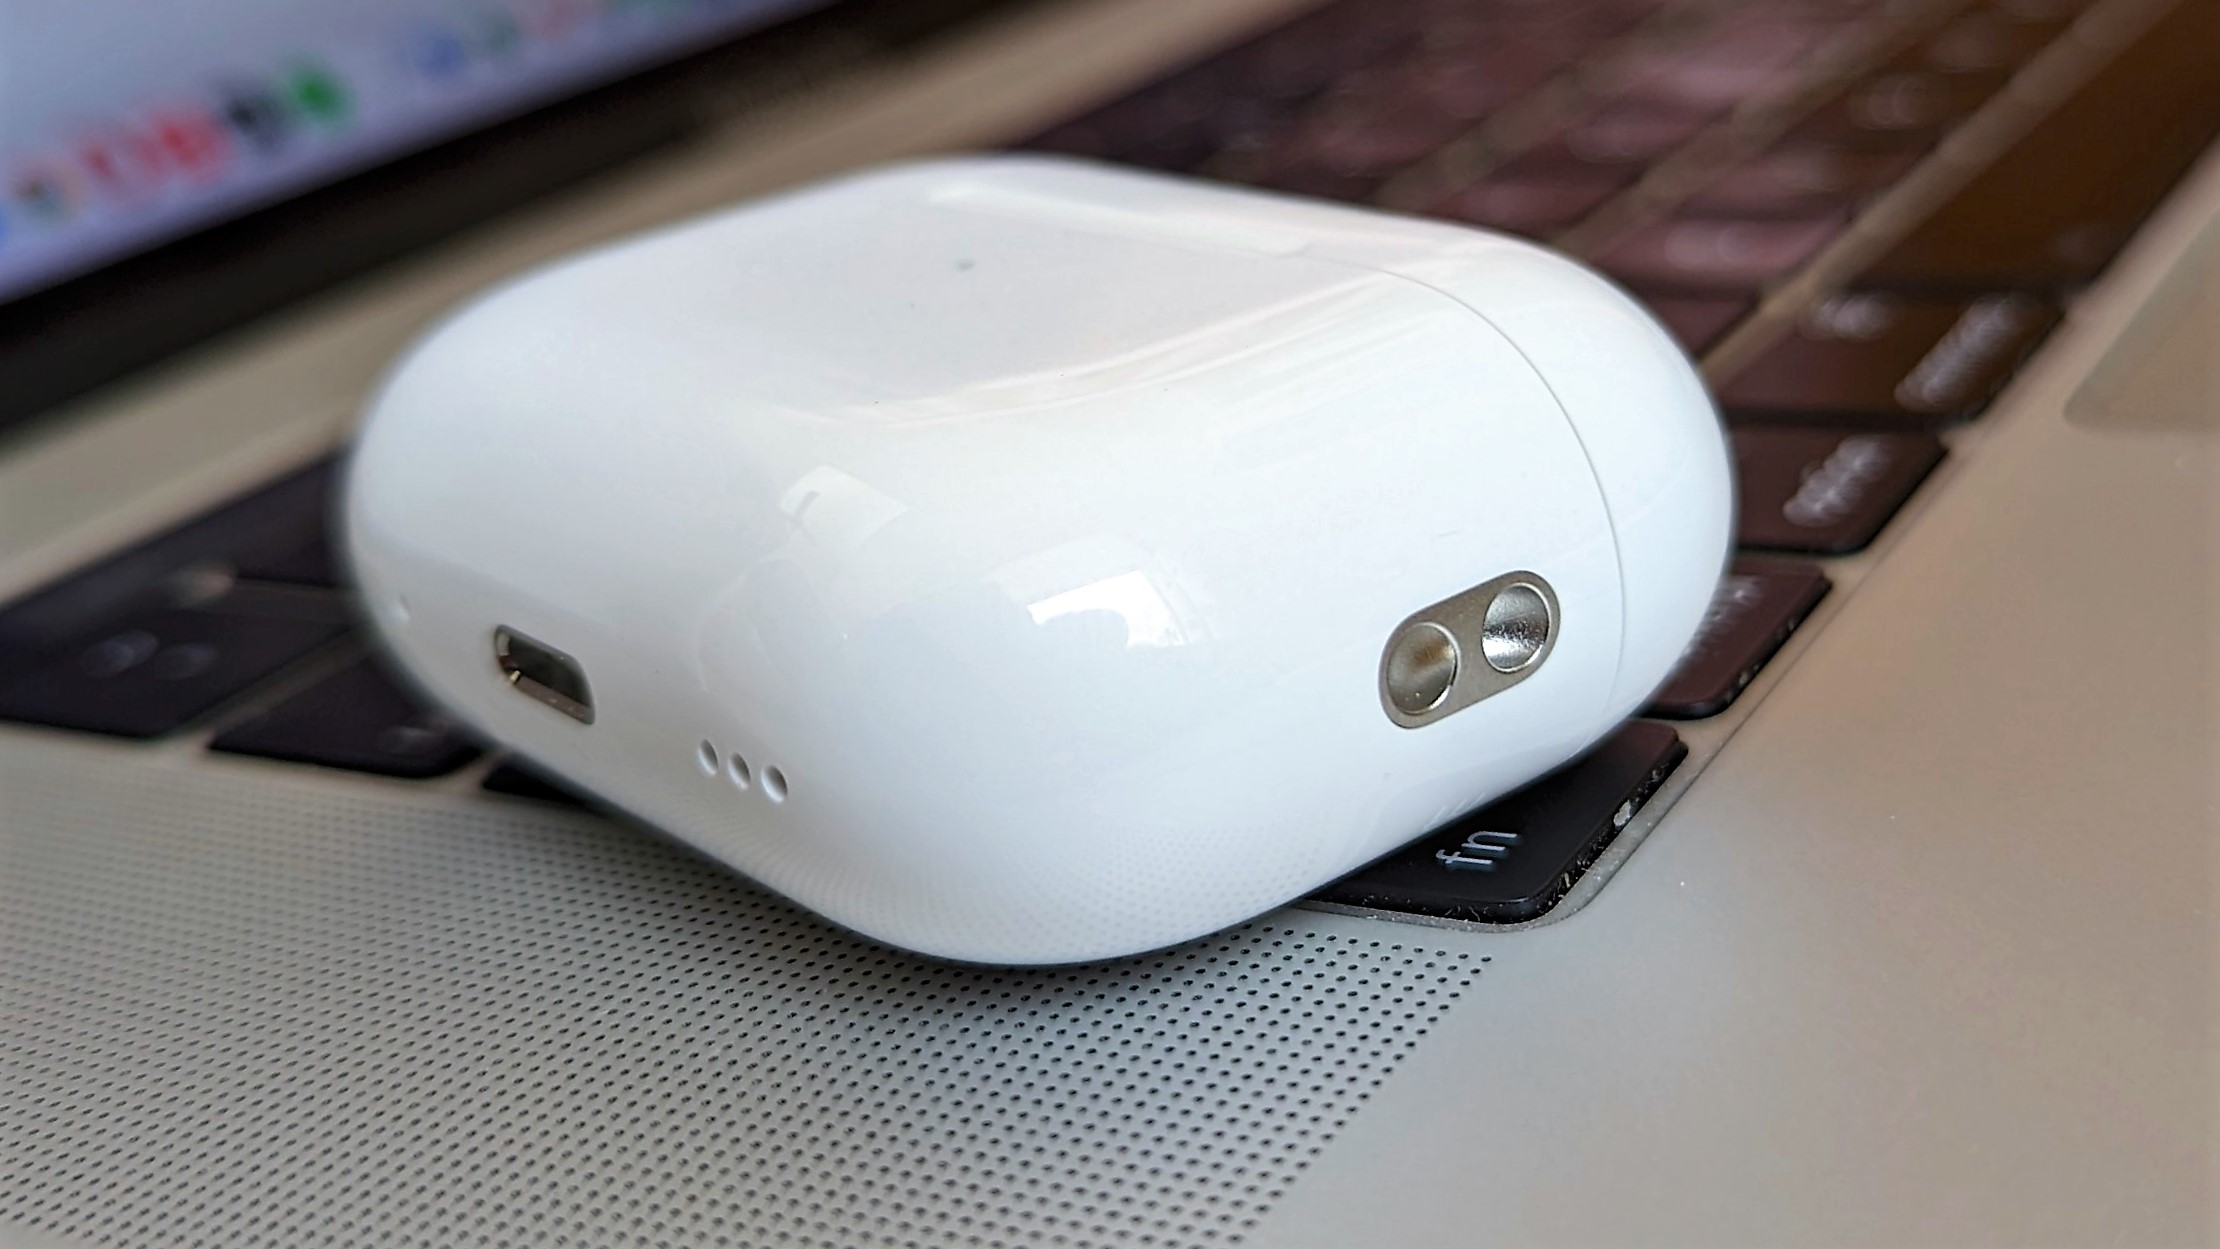 The Apple AirPods Pro 2 Charging Case rests on the MacBook keyboard